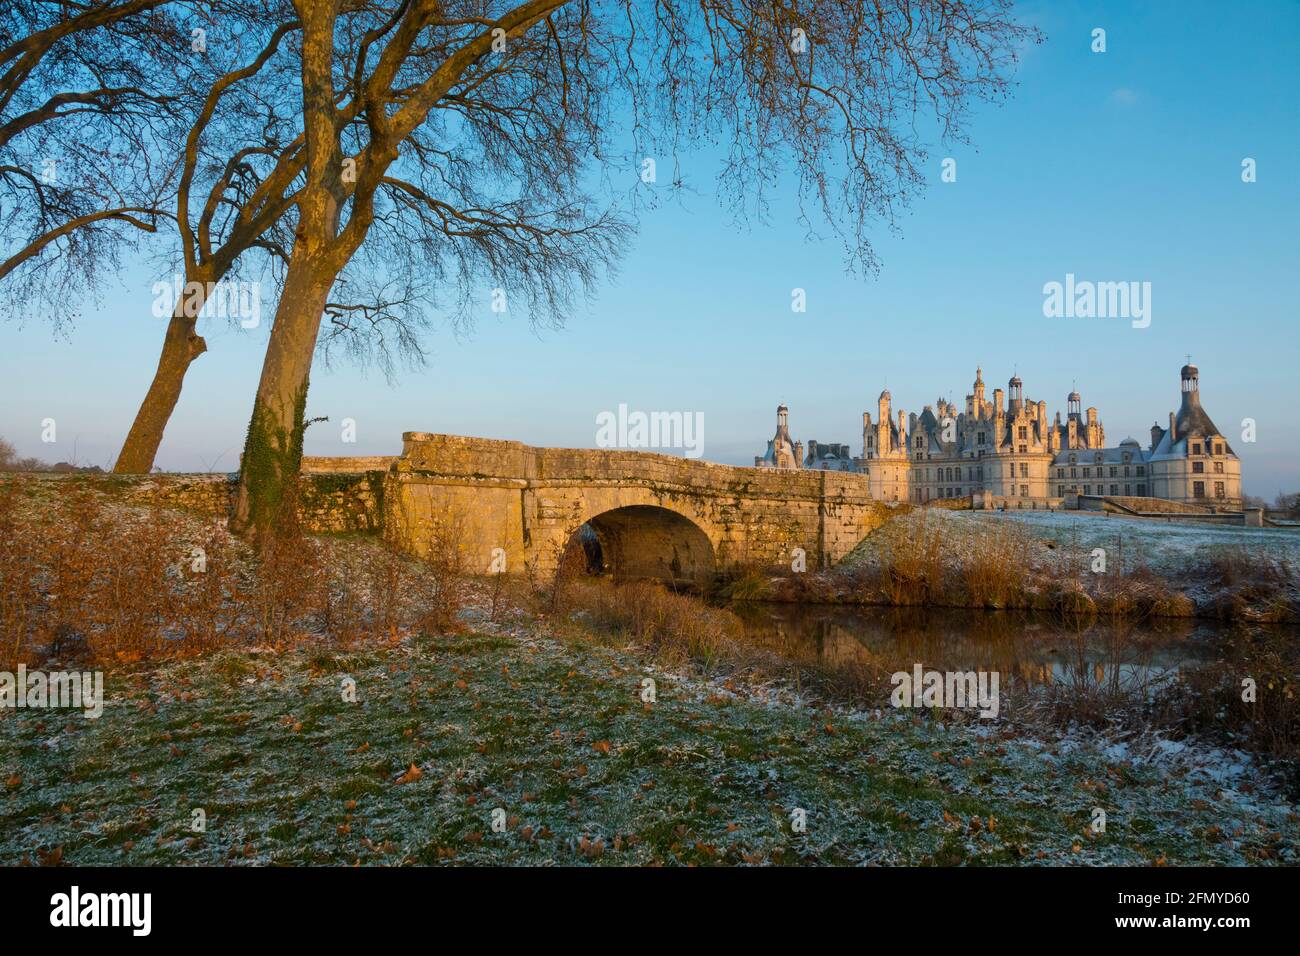 France, Loir-et-Cher (41), Chambord (UNESCO World Heritage), royal castle of the Renaissance, after the snowfall, Cosson canal Stock Photo